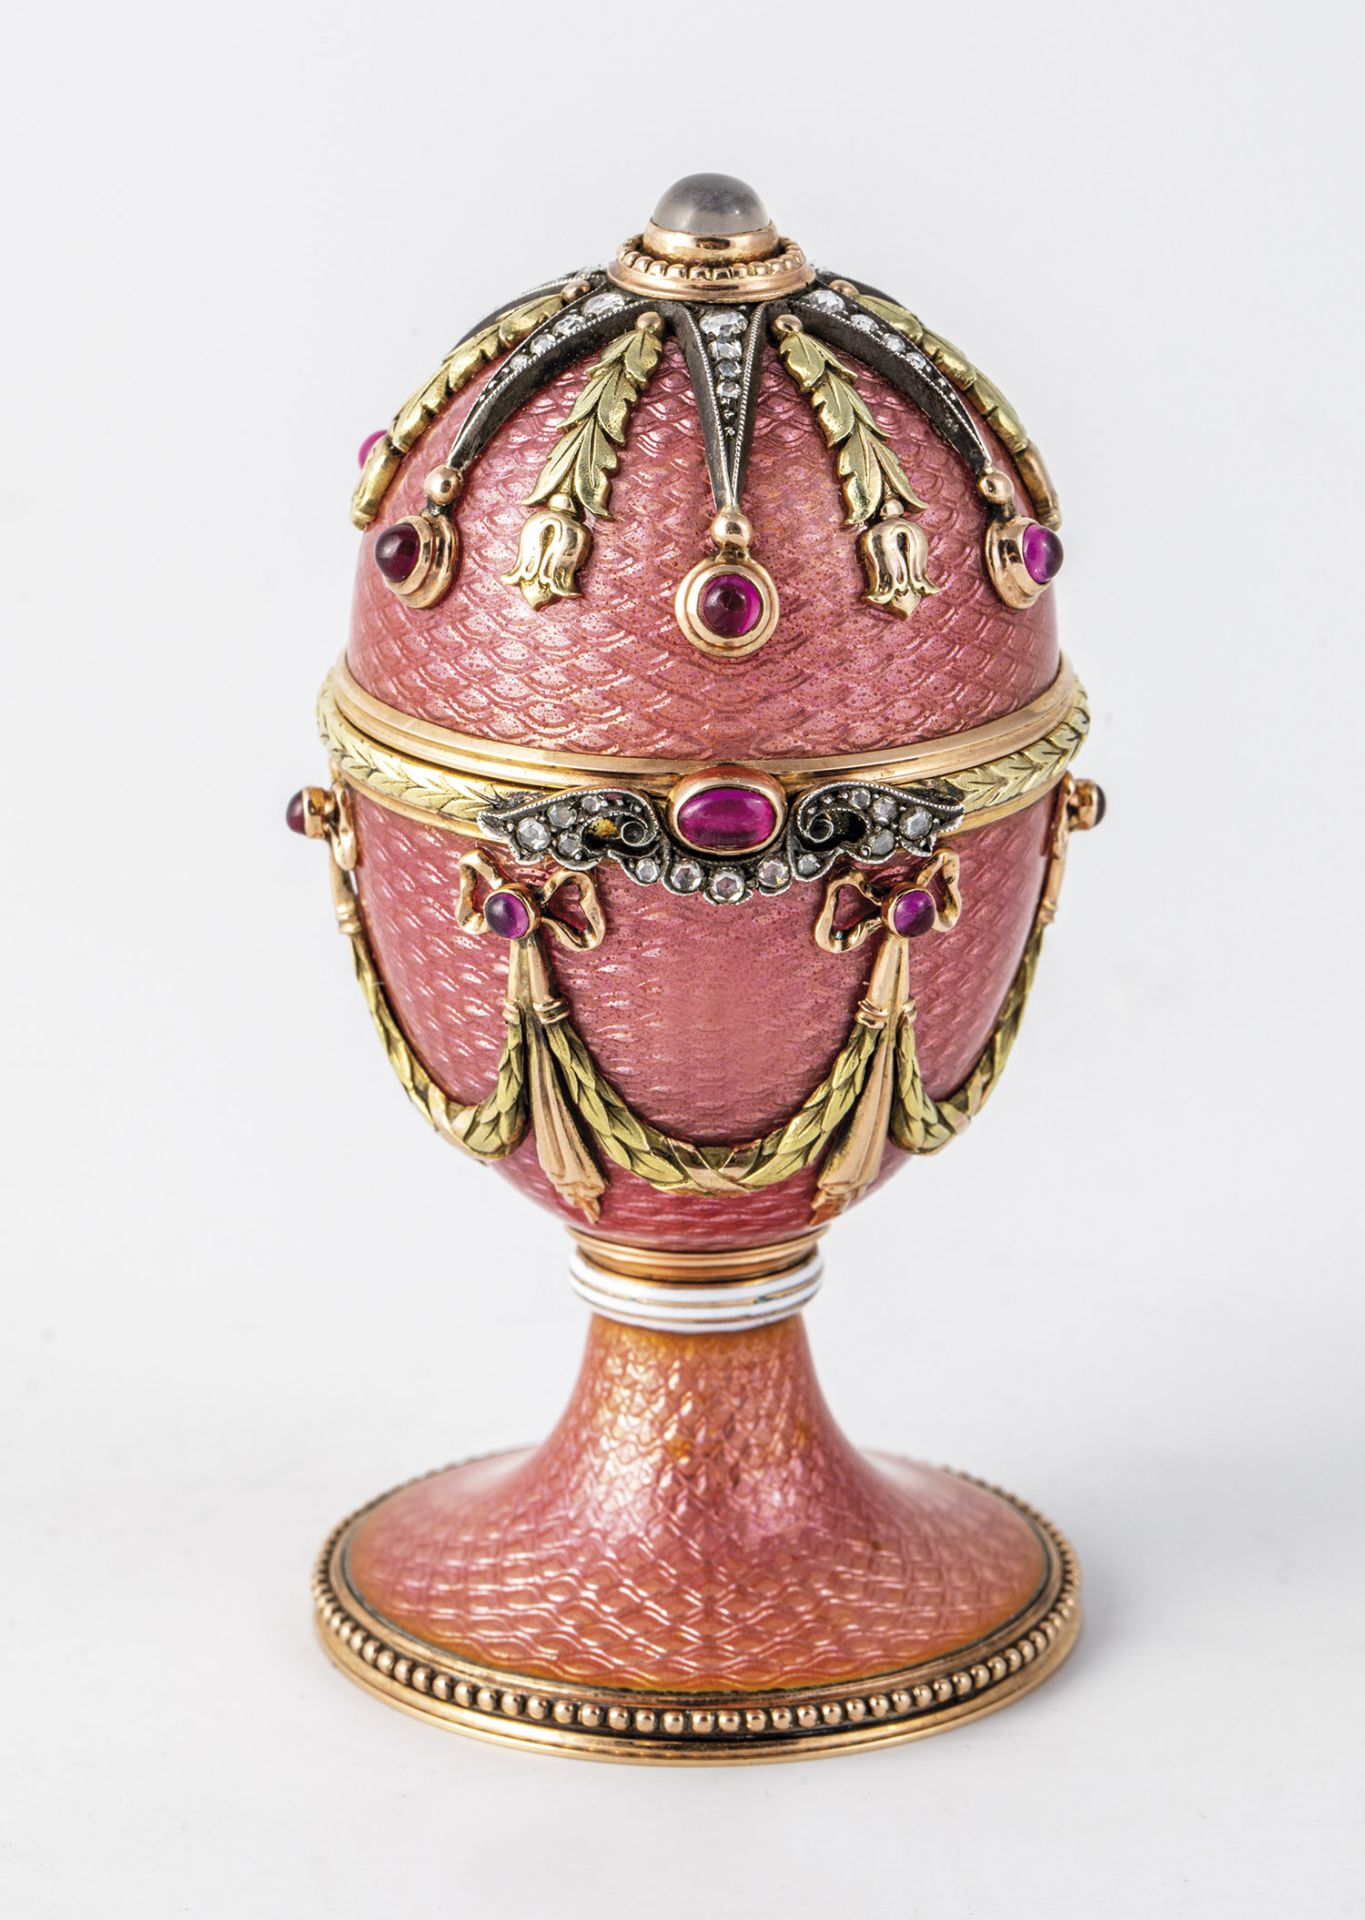 Gold Egg Box with Guilloché Enamel - Image 2 of 4